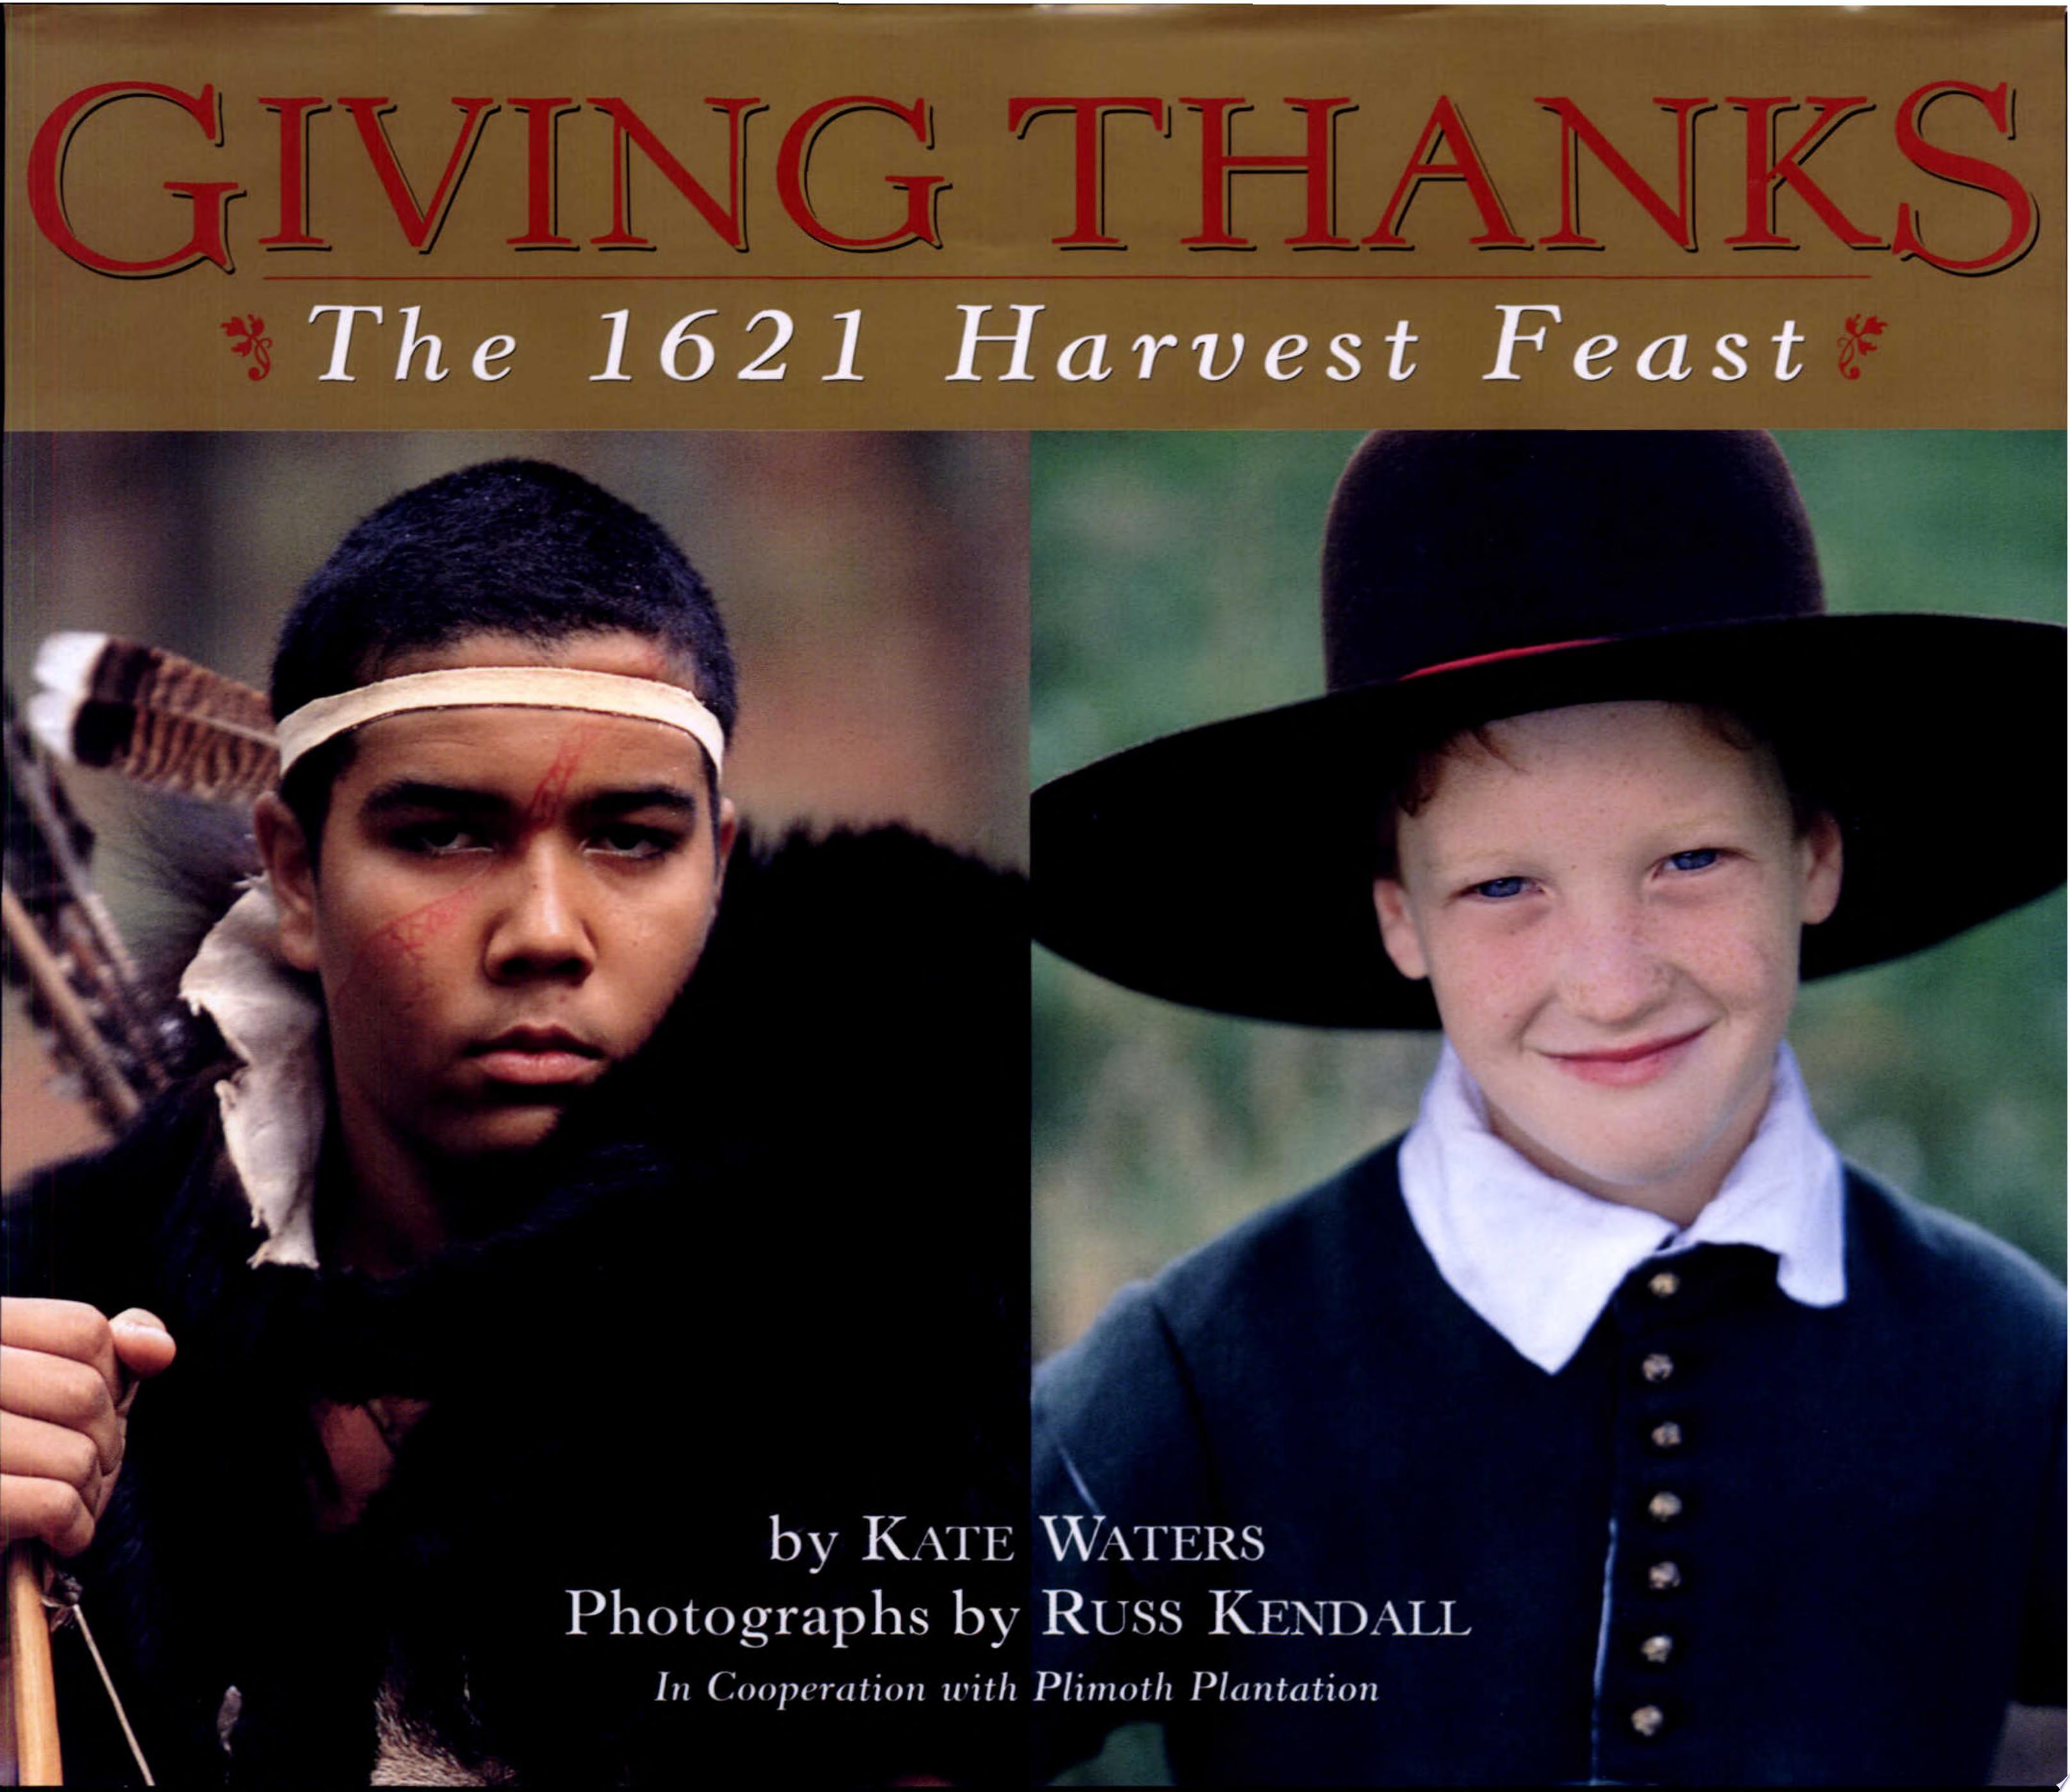 Image for "Giving Thanks"